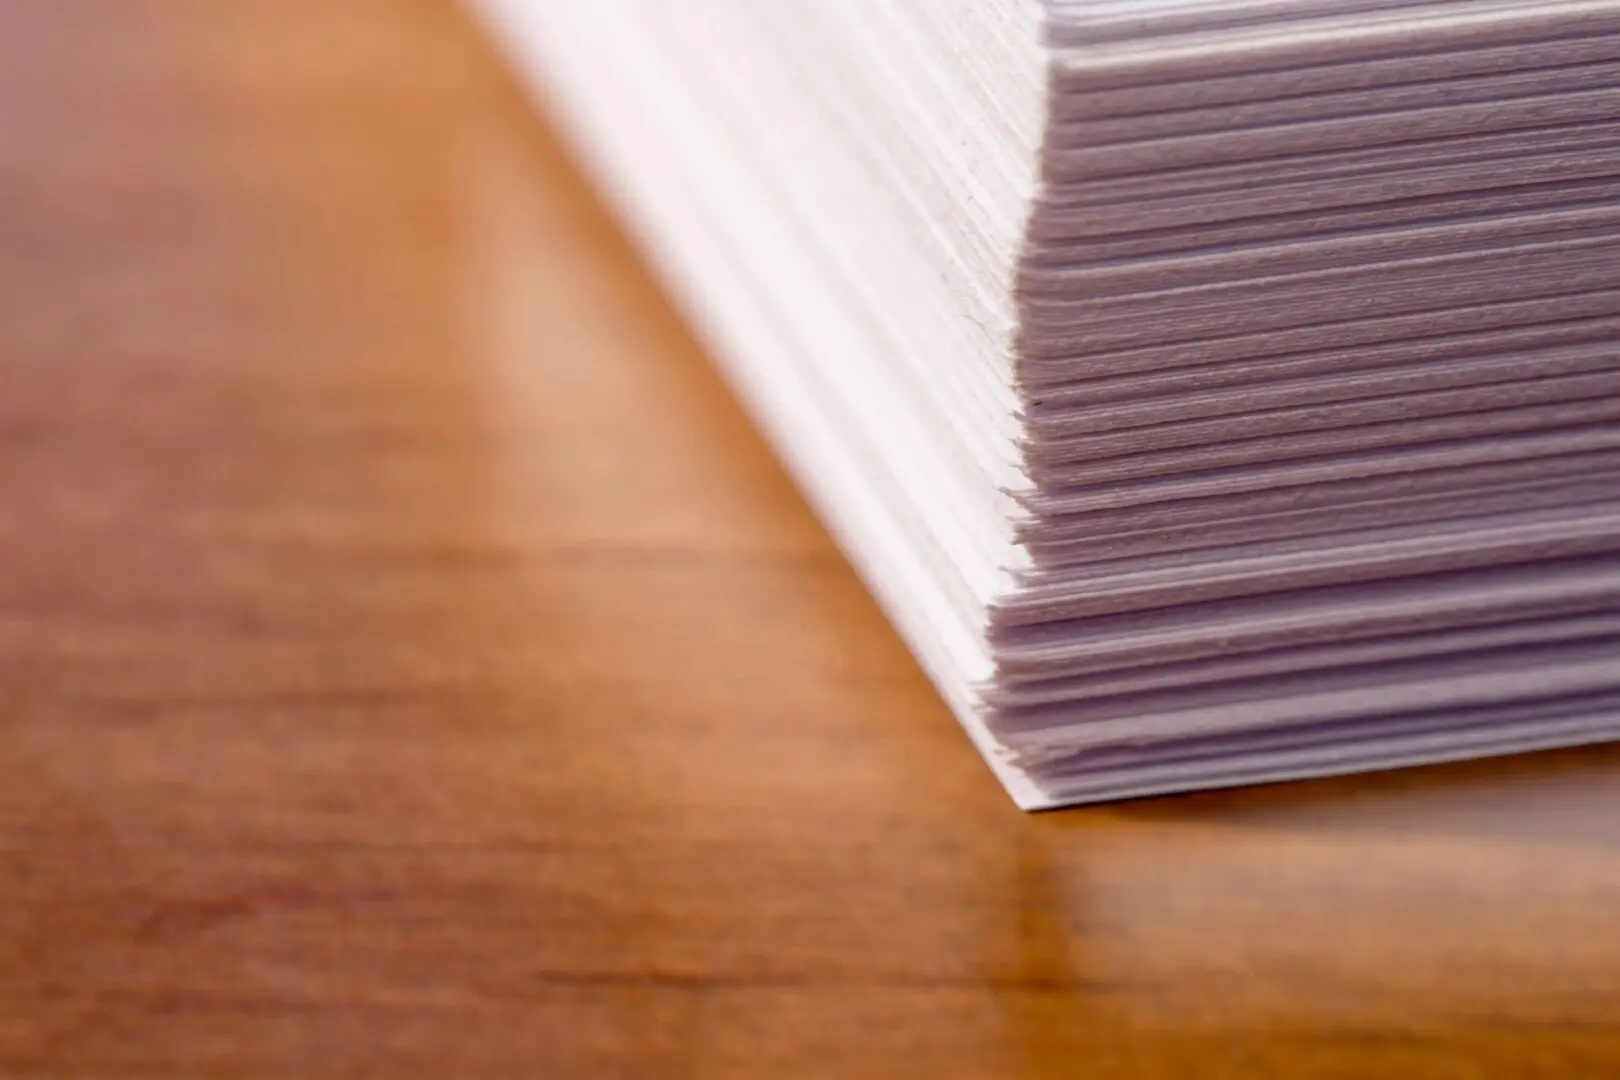 A stack of papers on top of a wooden table.